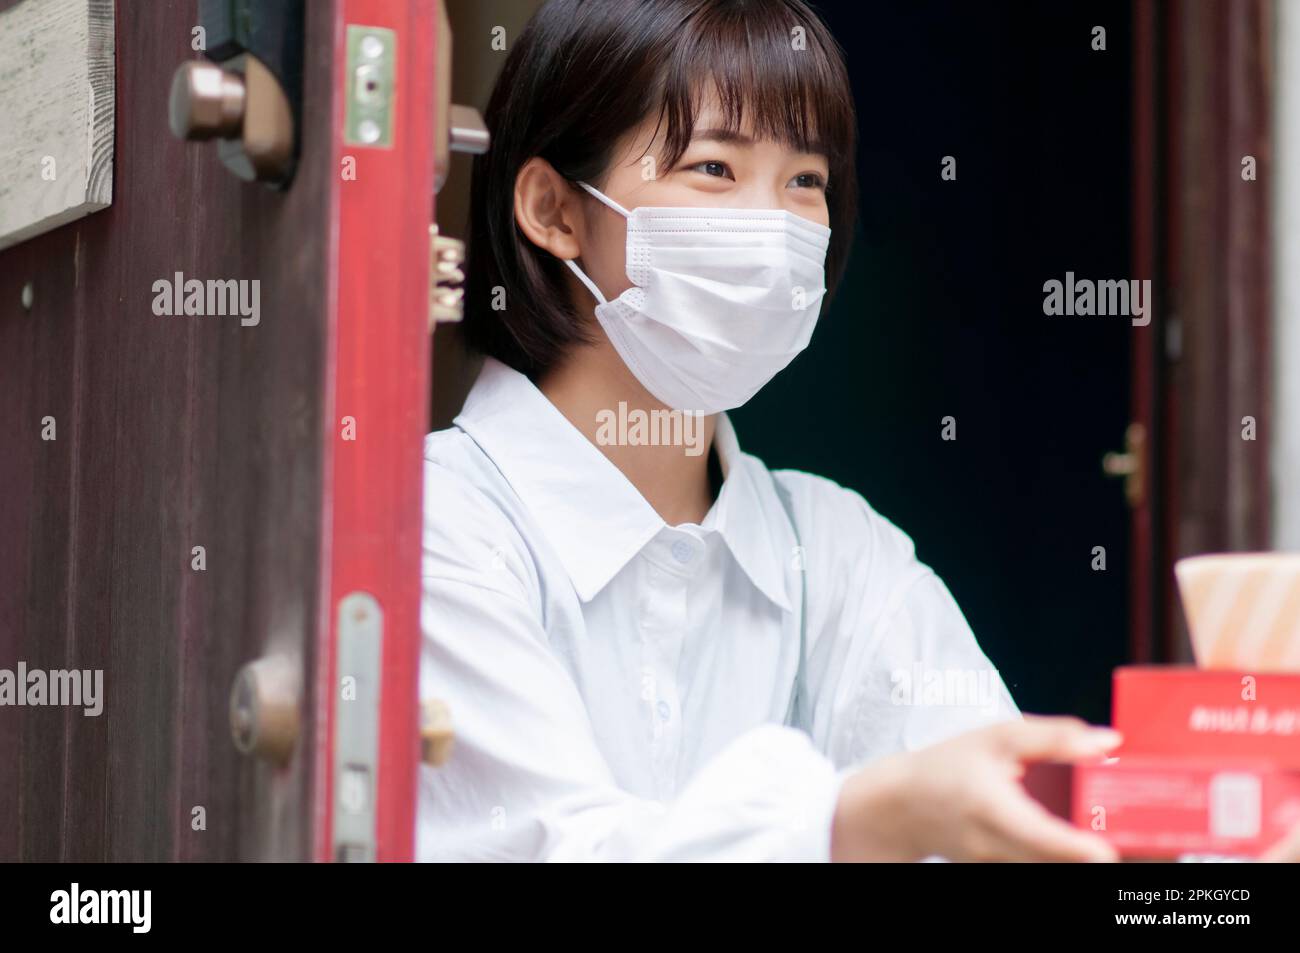 Young woman receiving delivery Stock Photo